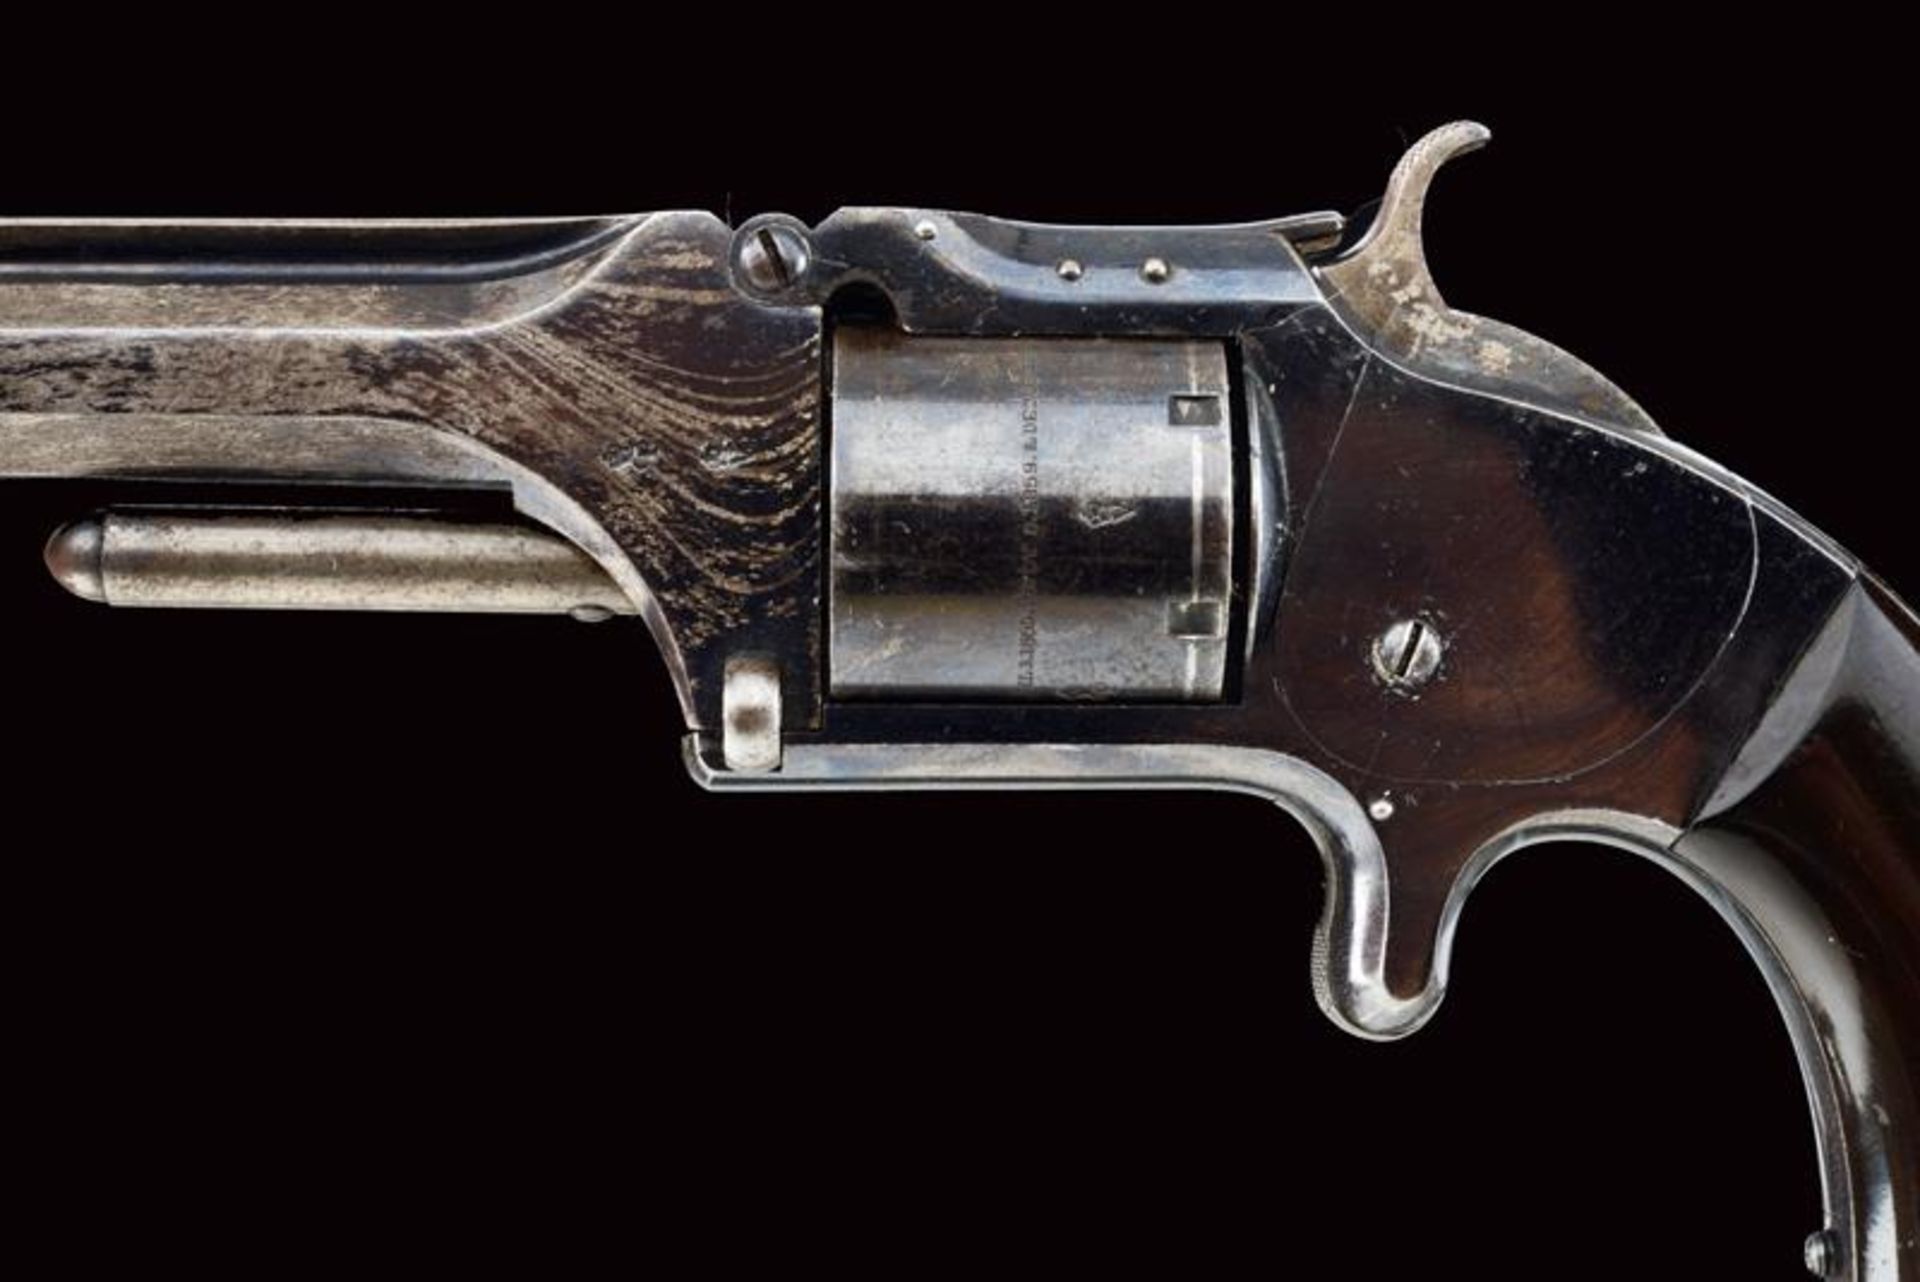 A S&W No. 2 Old Model Revolver - Image 4 of 6